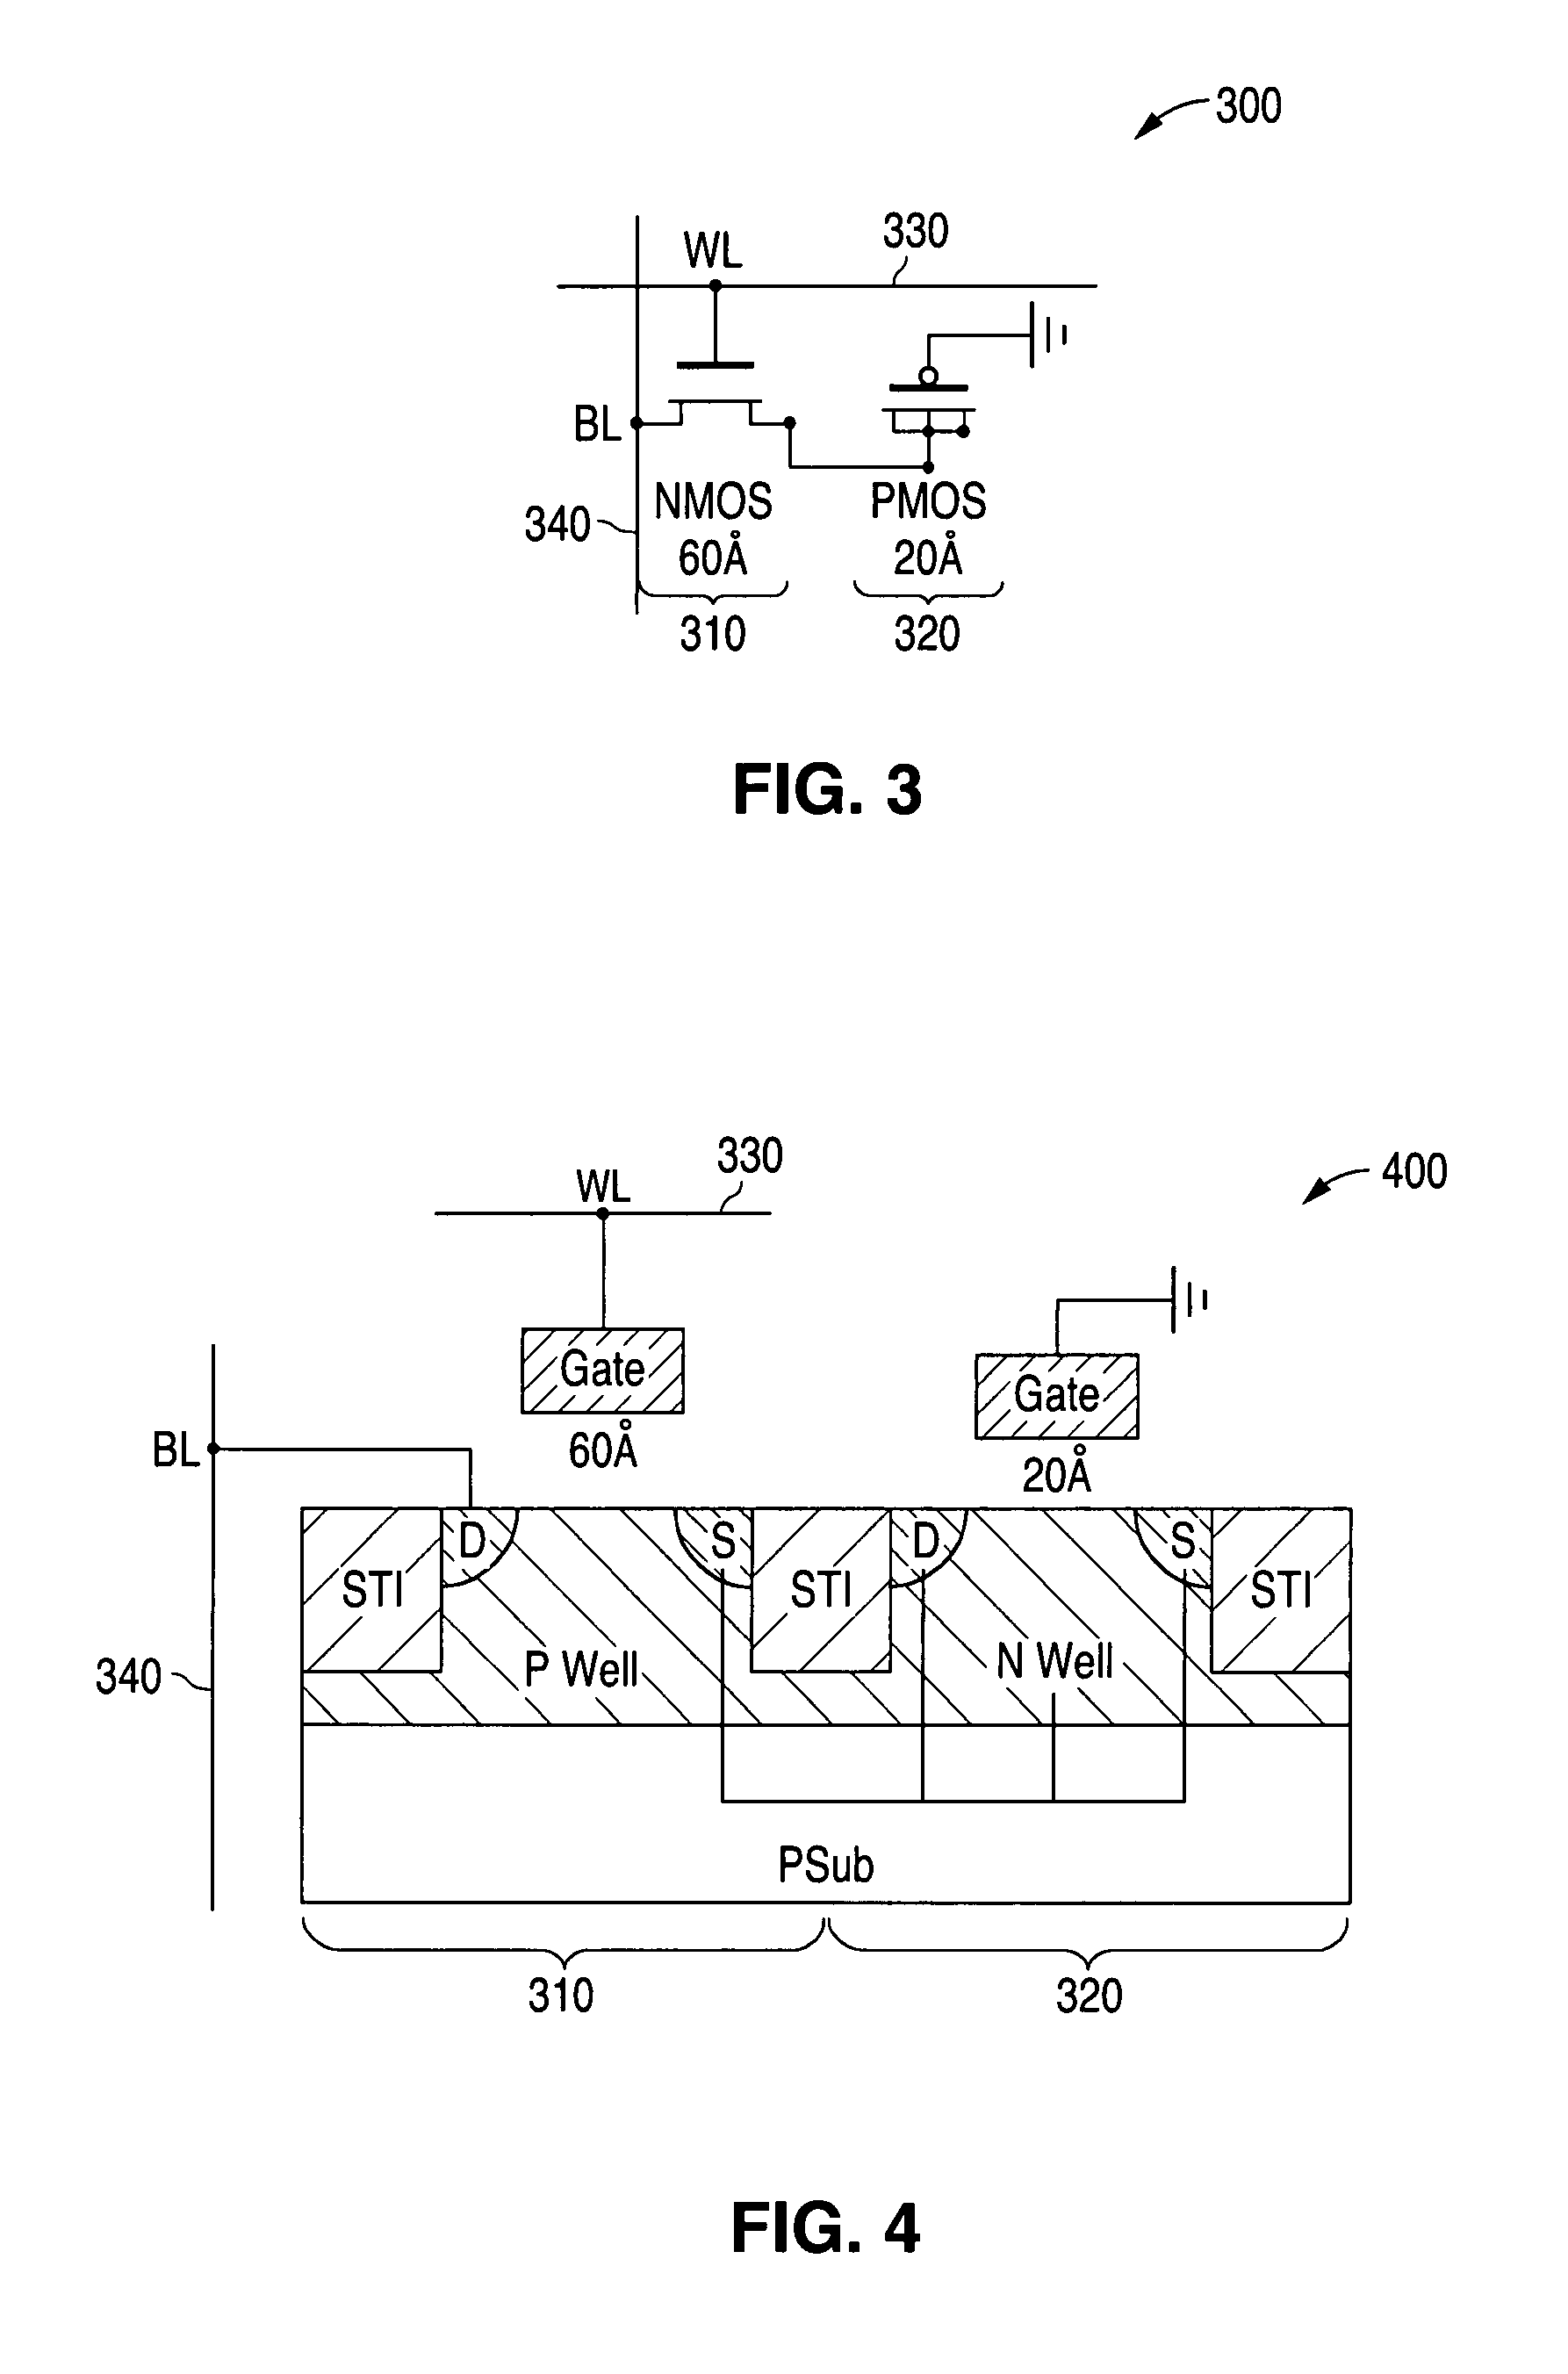 System and method for providing an EPROM with different gate oxide thicknesses